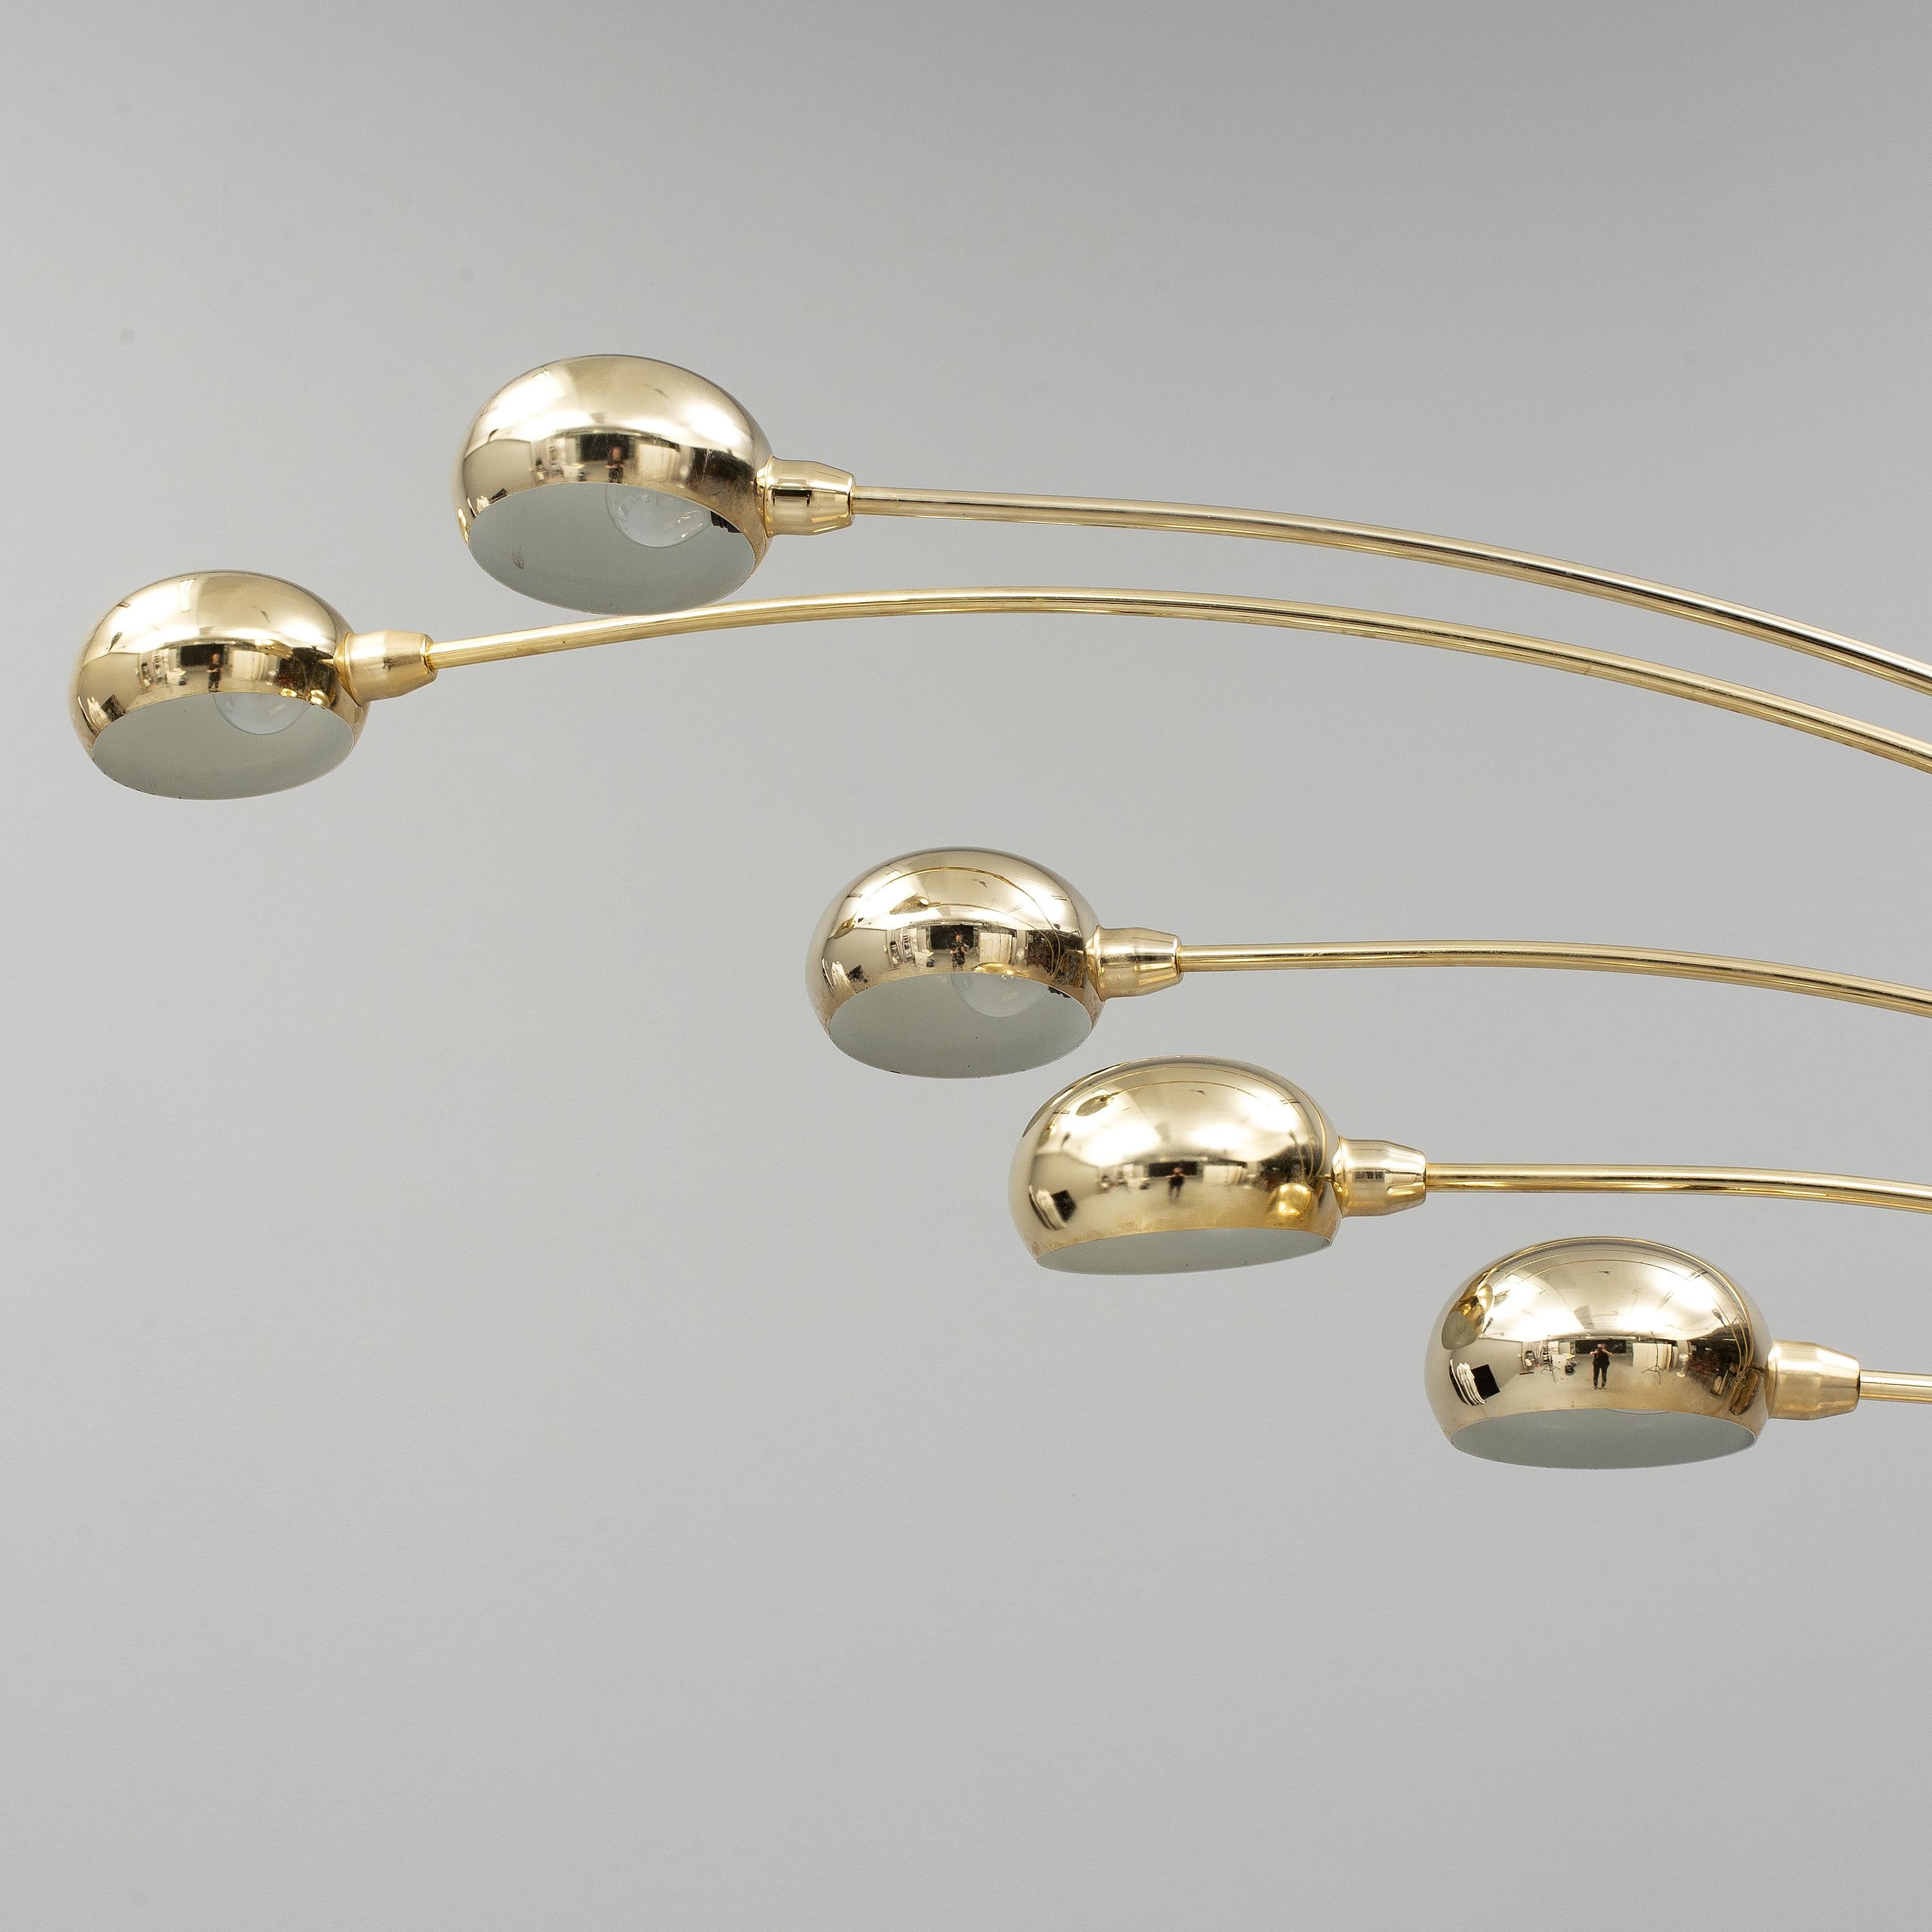 Five arms brass and marble floor lamp from Ateljé Lyktan, made in Sweden in 20th century.